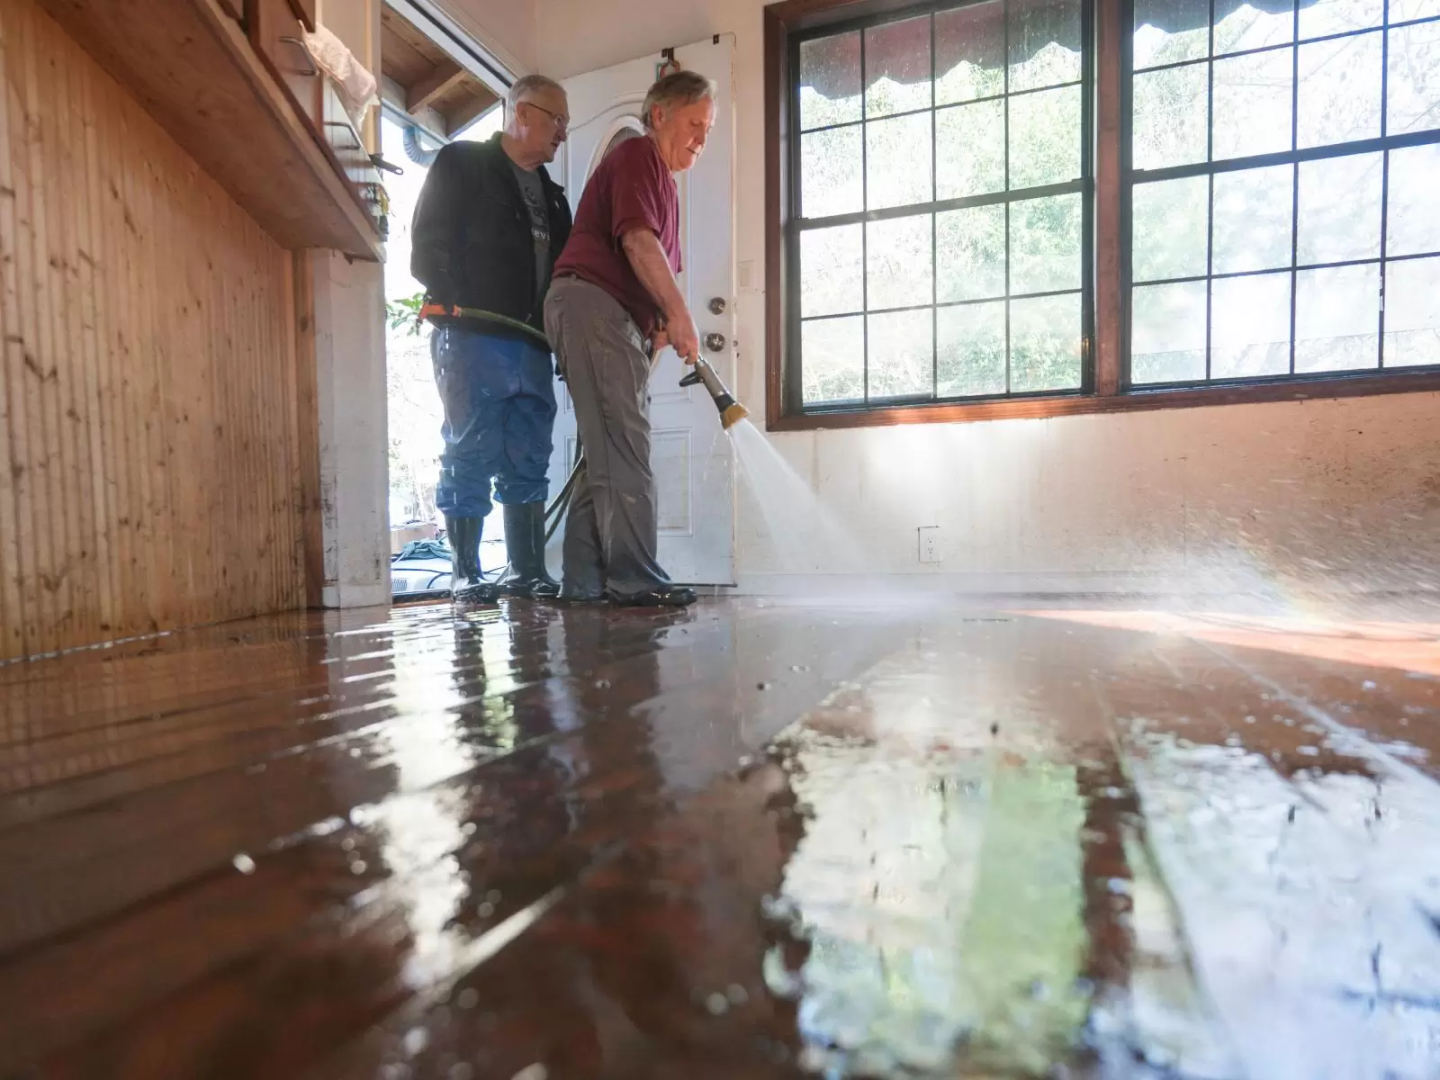 Two people spraying down a the floors of their house with a hose after a flood